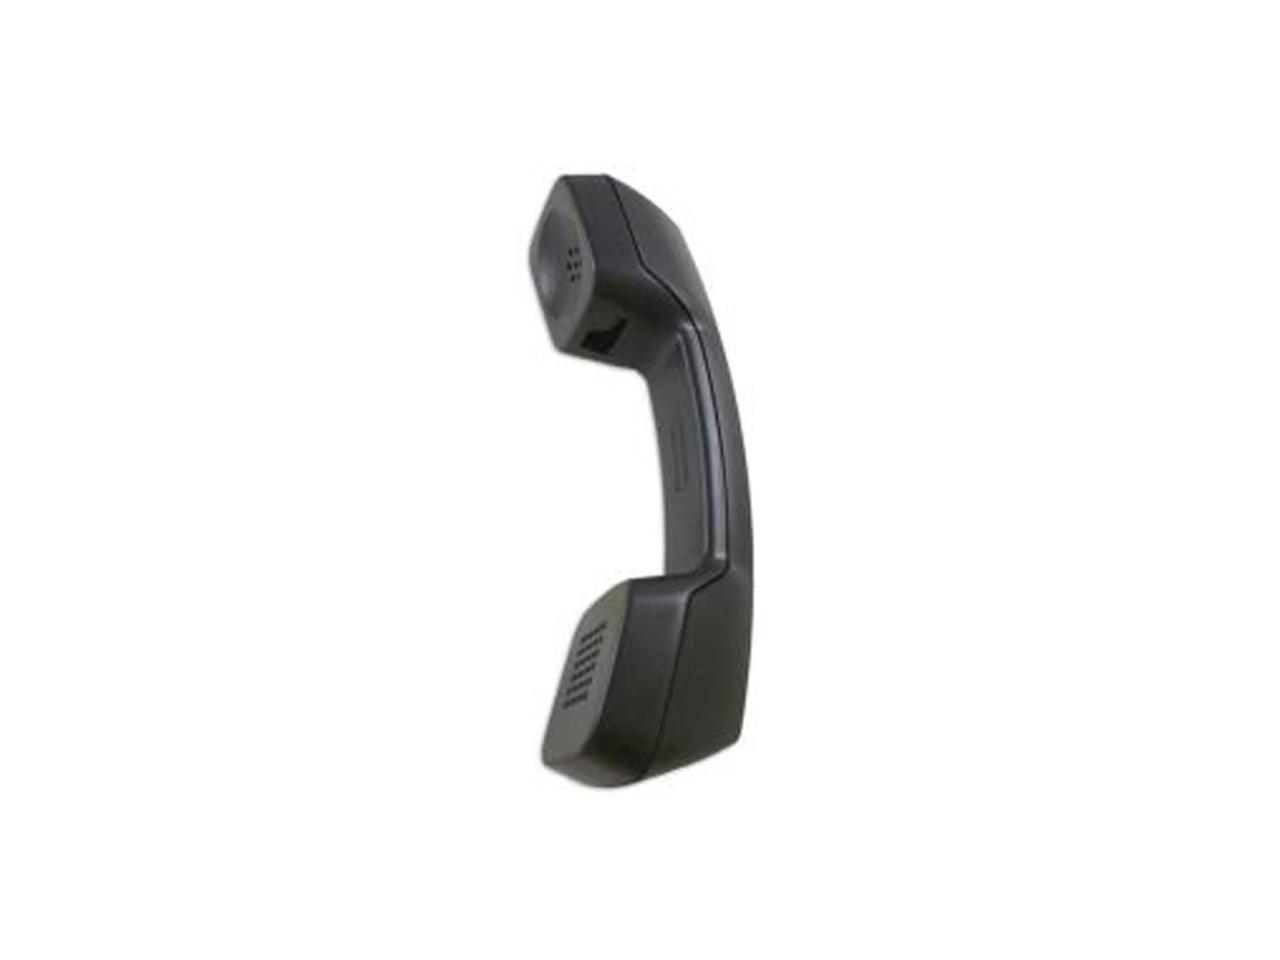 NEW Replacement K-Style Handset for Panasonic KX-T7600 Series Phone Black 616174239575